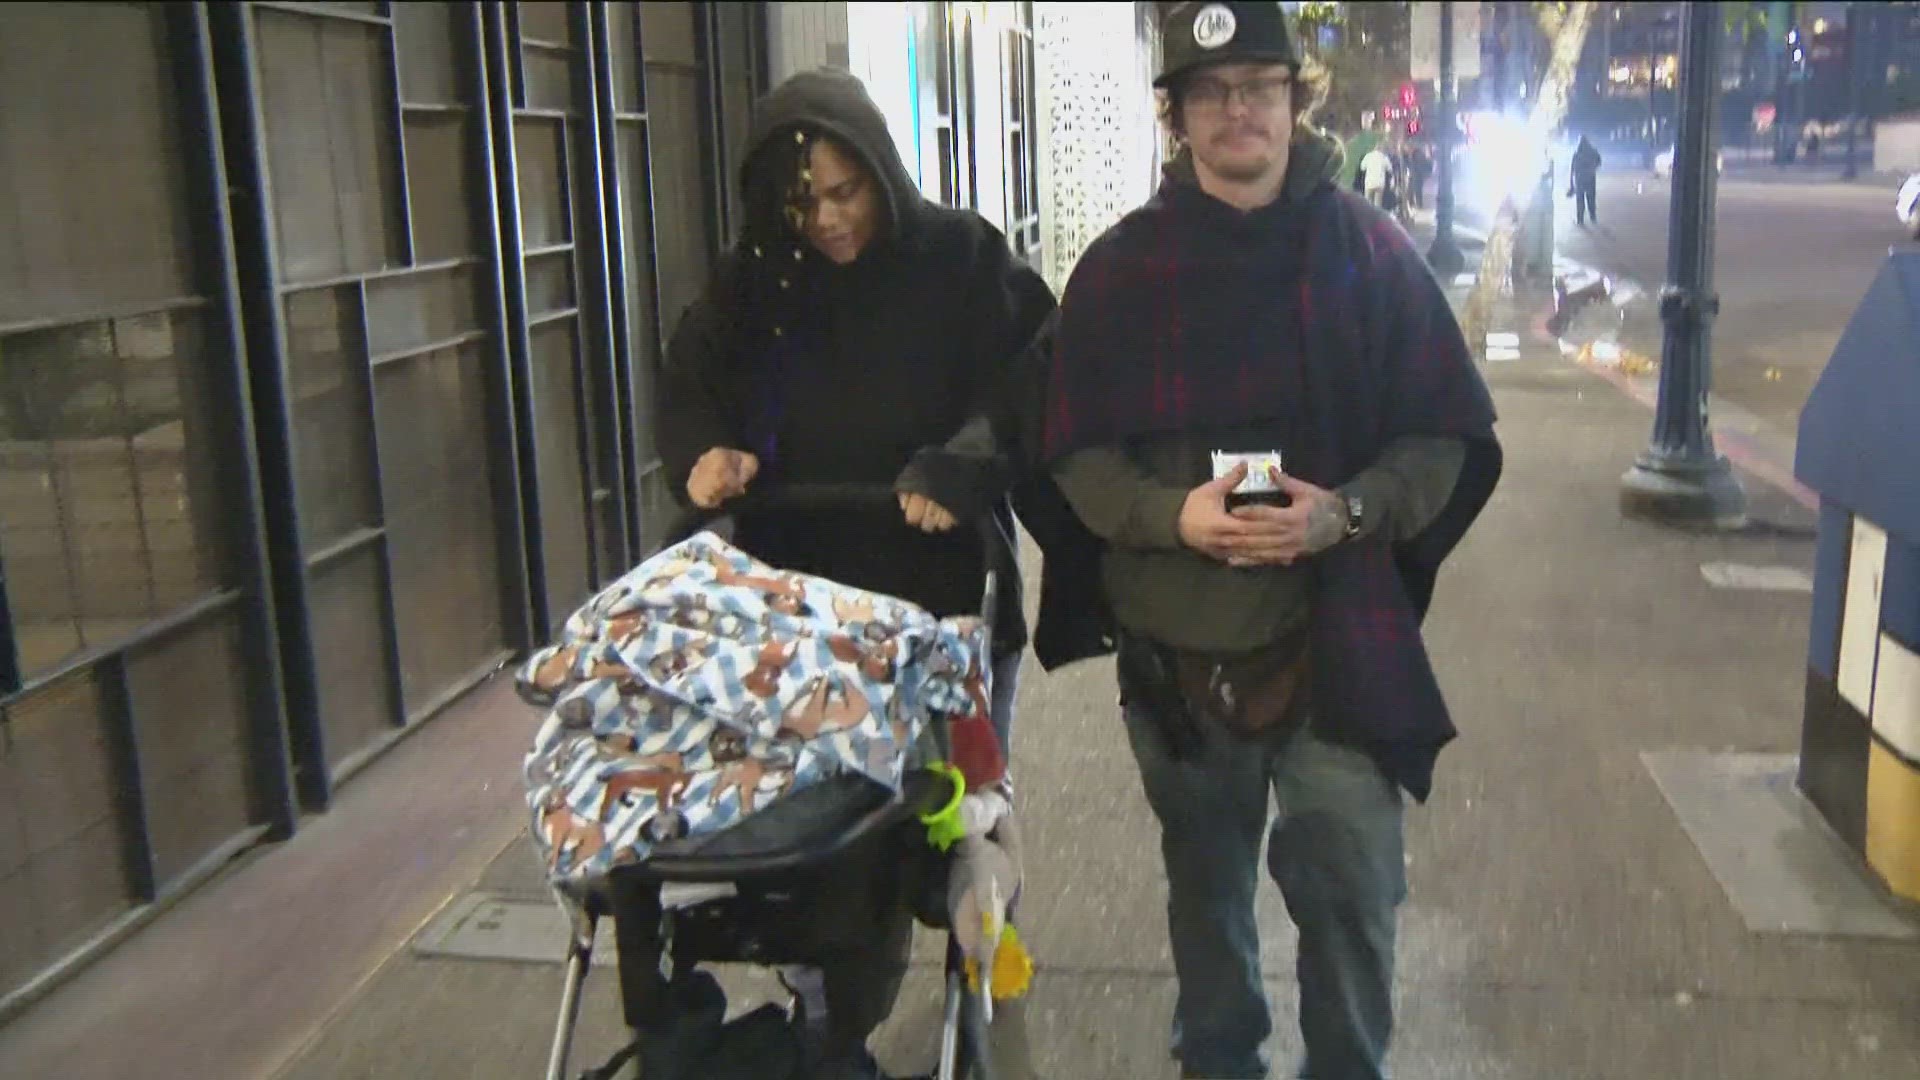 CBS 8 catches up with a young unsheltered couple and their baby one year later.